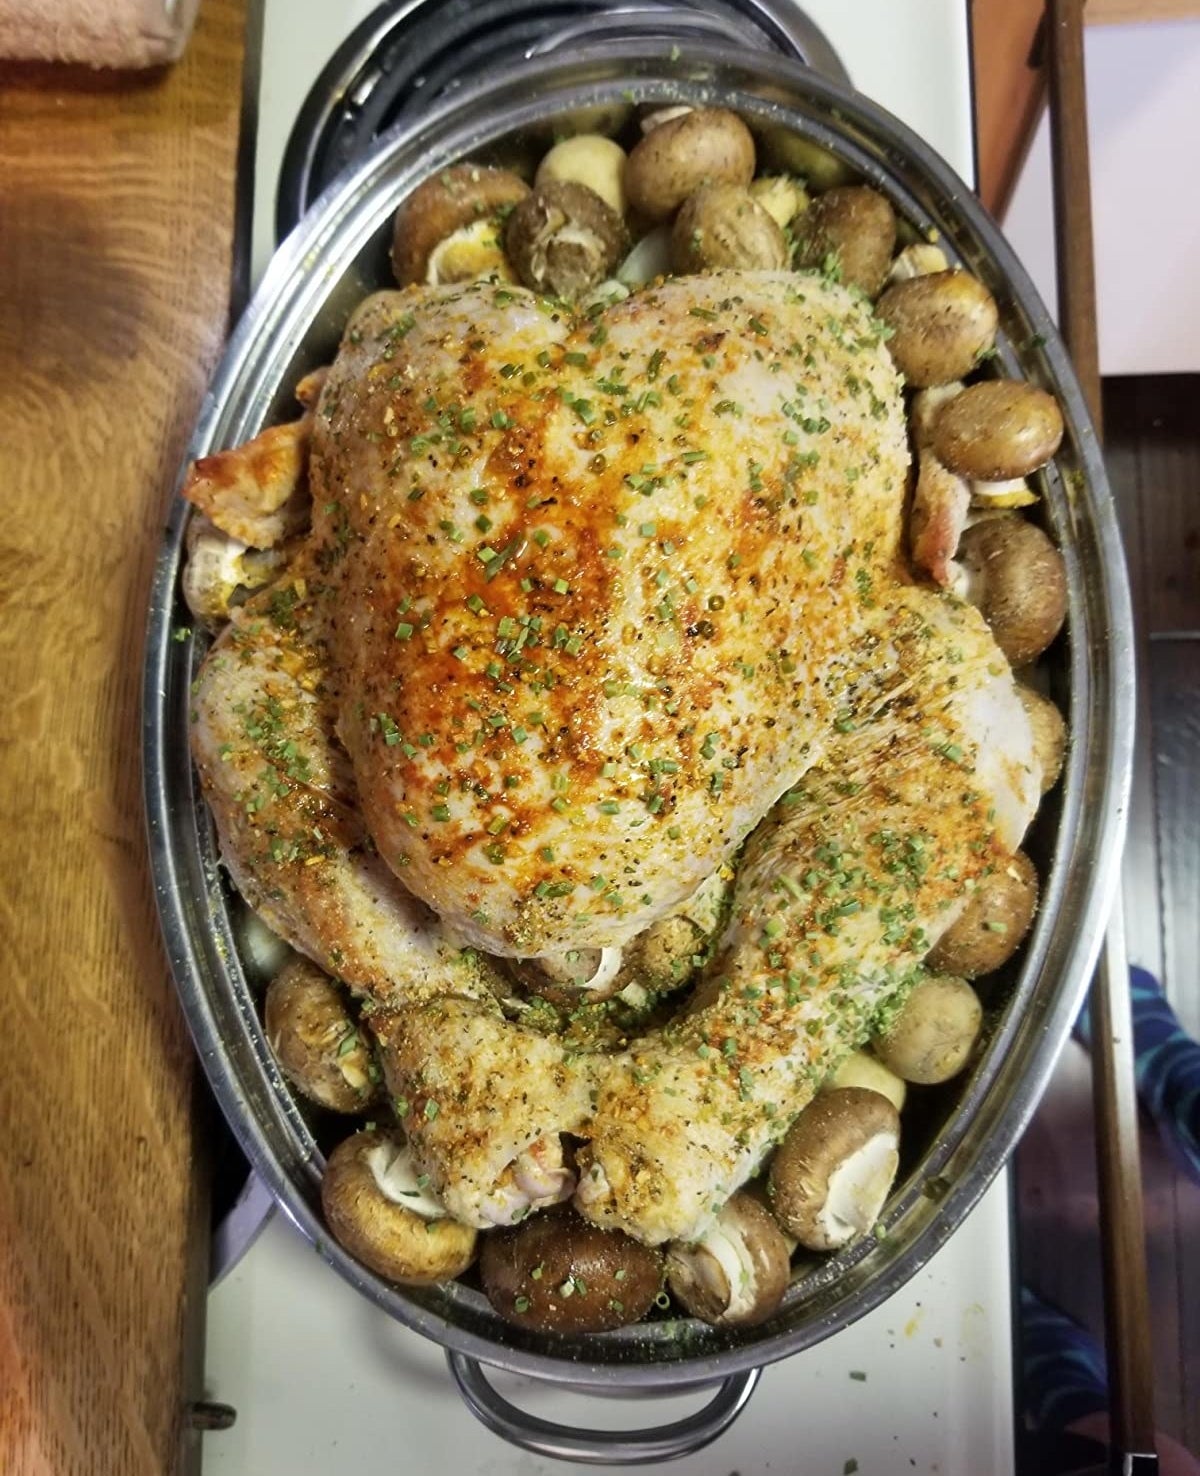 Reviewer photo of a turkey and vegetables inside the roaster